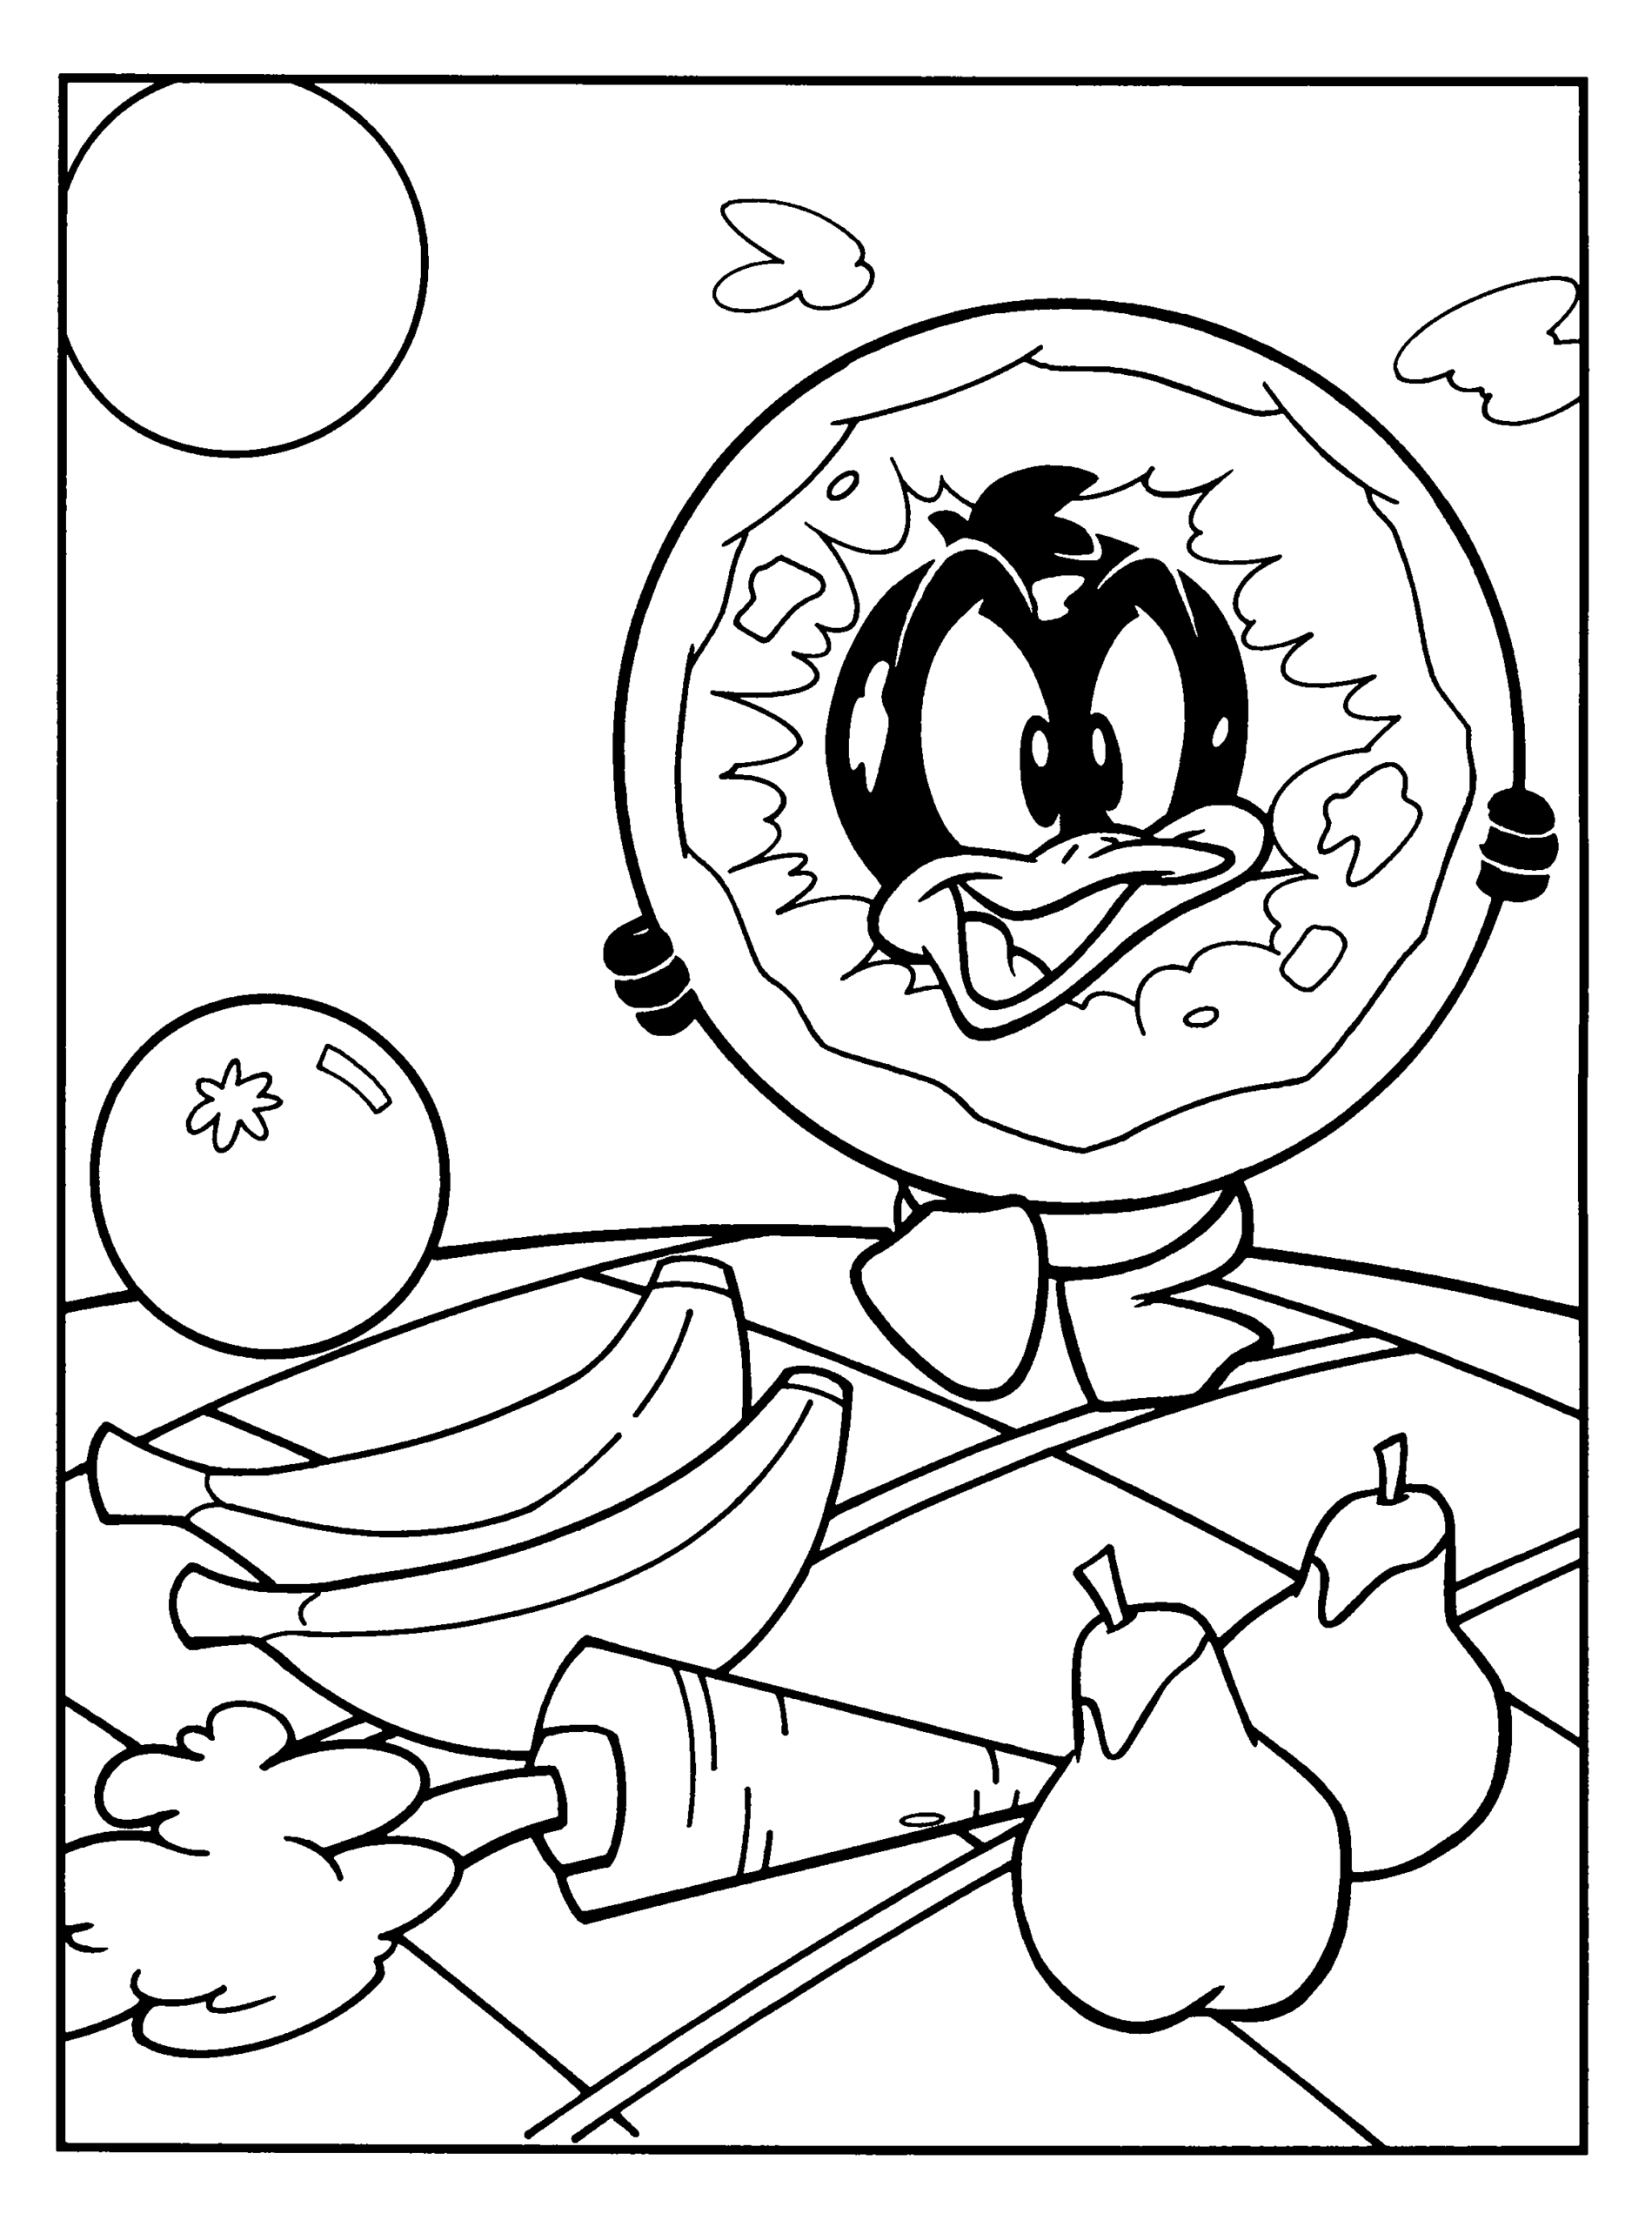 Looney Tunes Coloring Pages TV Film looney tunes 17 Printable 2020 04583 Coloring4free